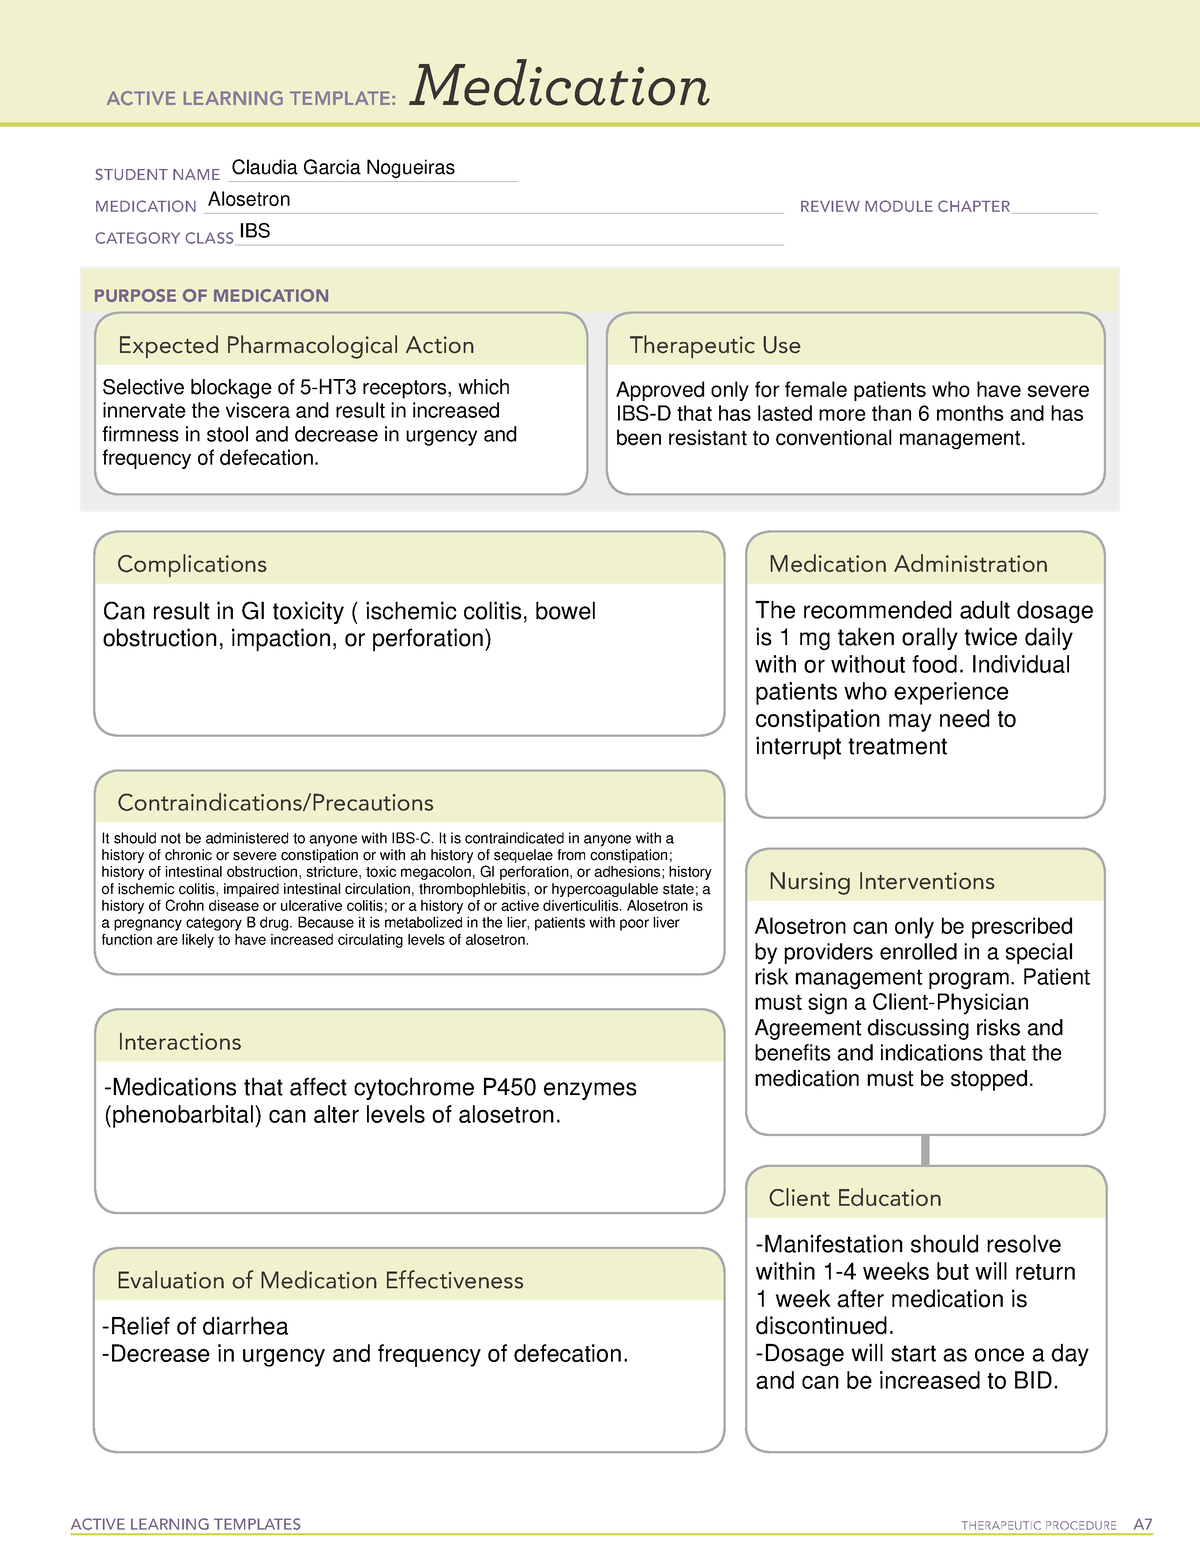 ativan-medication-template-for-ati-active-learning-templates